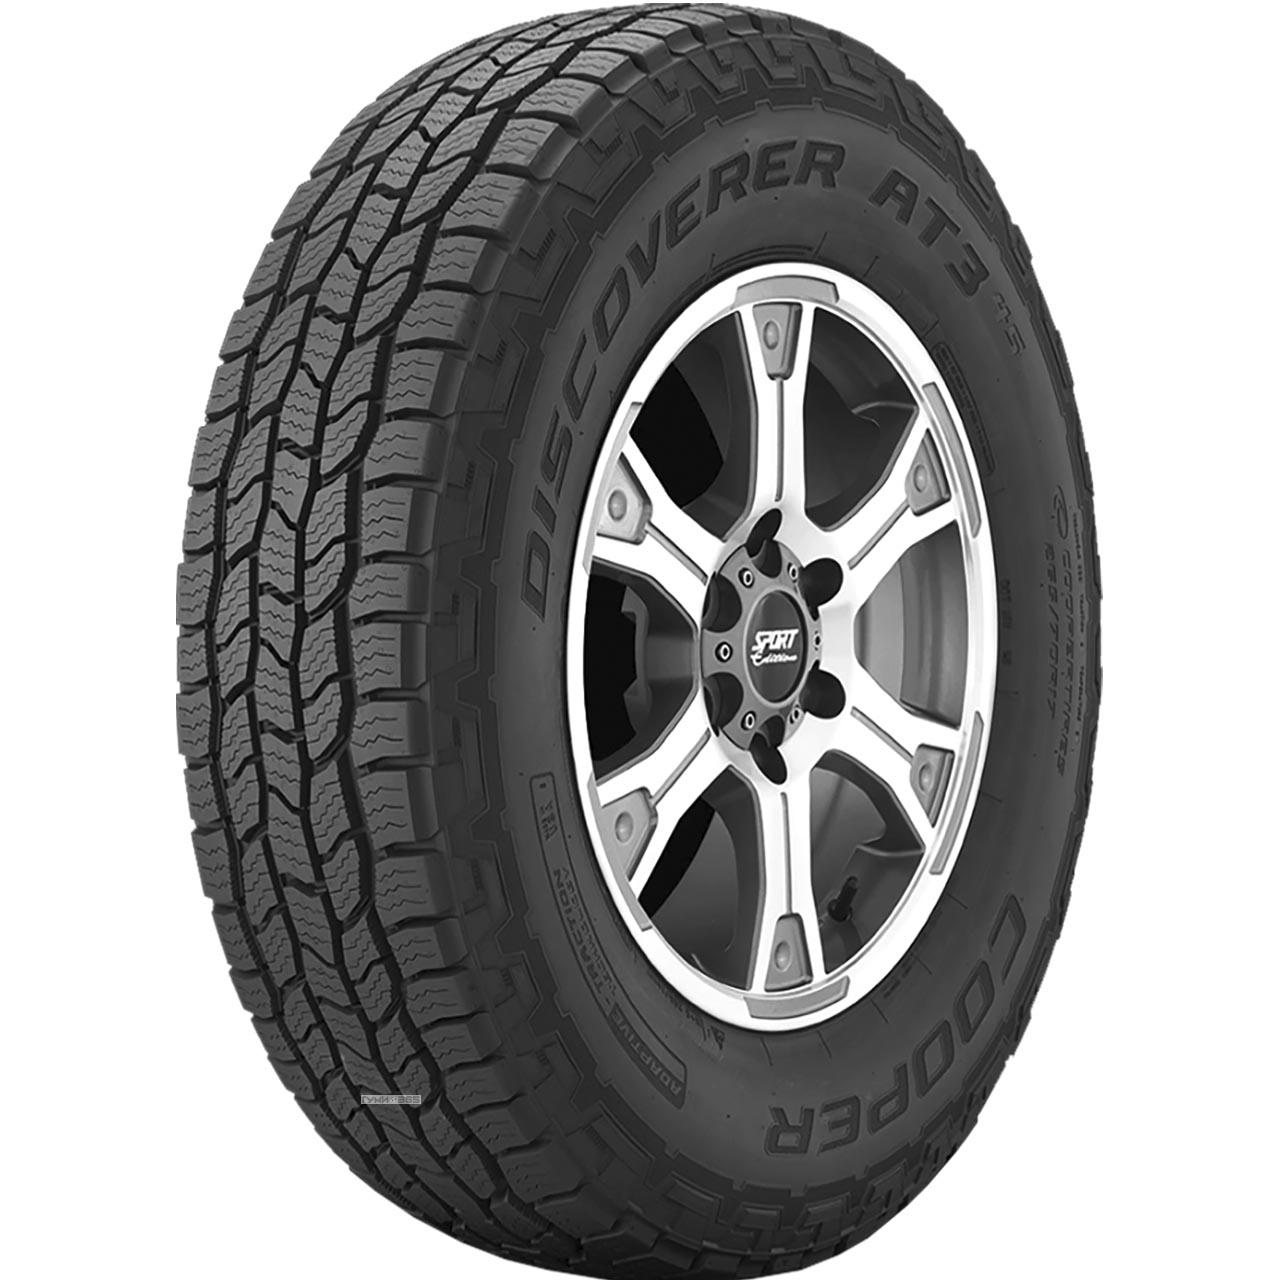 DISCOVERER AT3 4S XL 235 65R17 108T TL Cooper 365